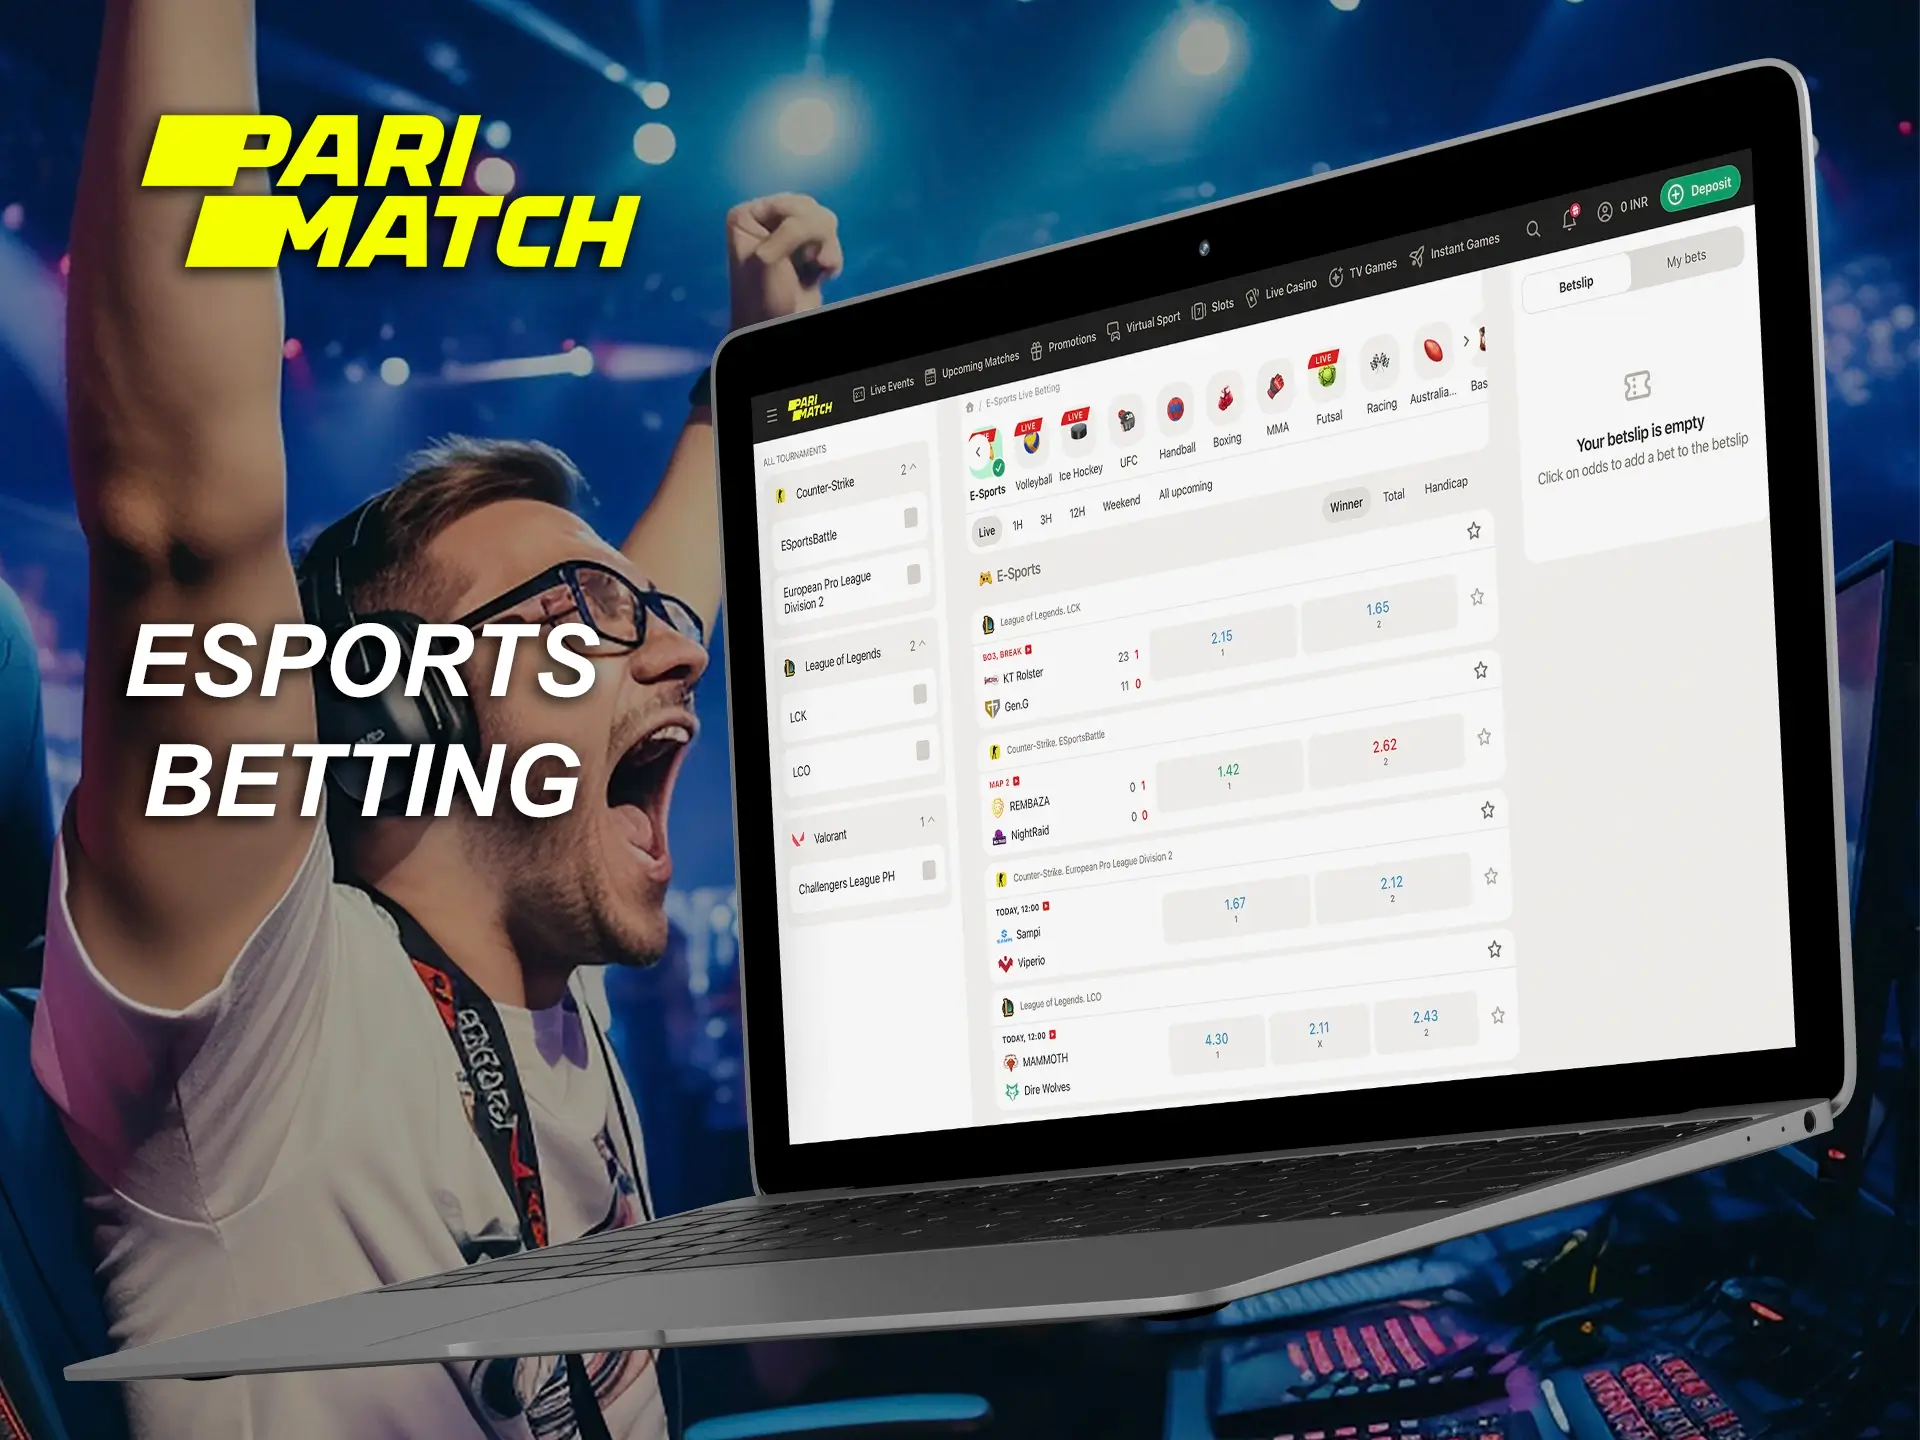 All cyber sports disciplines at PariMatch Casino are available for betting.